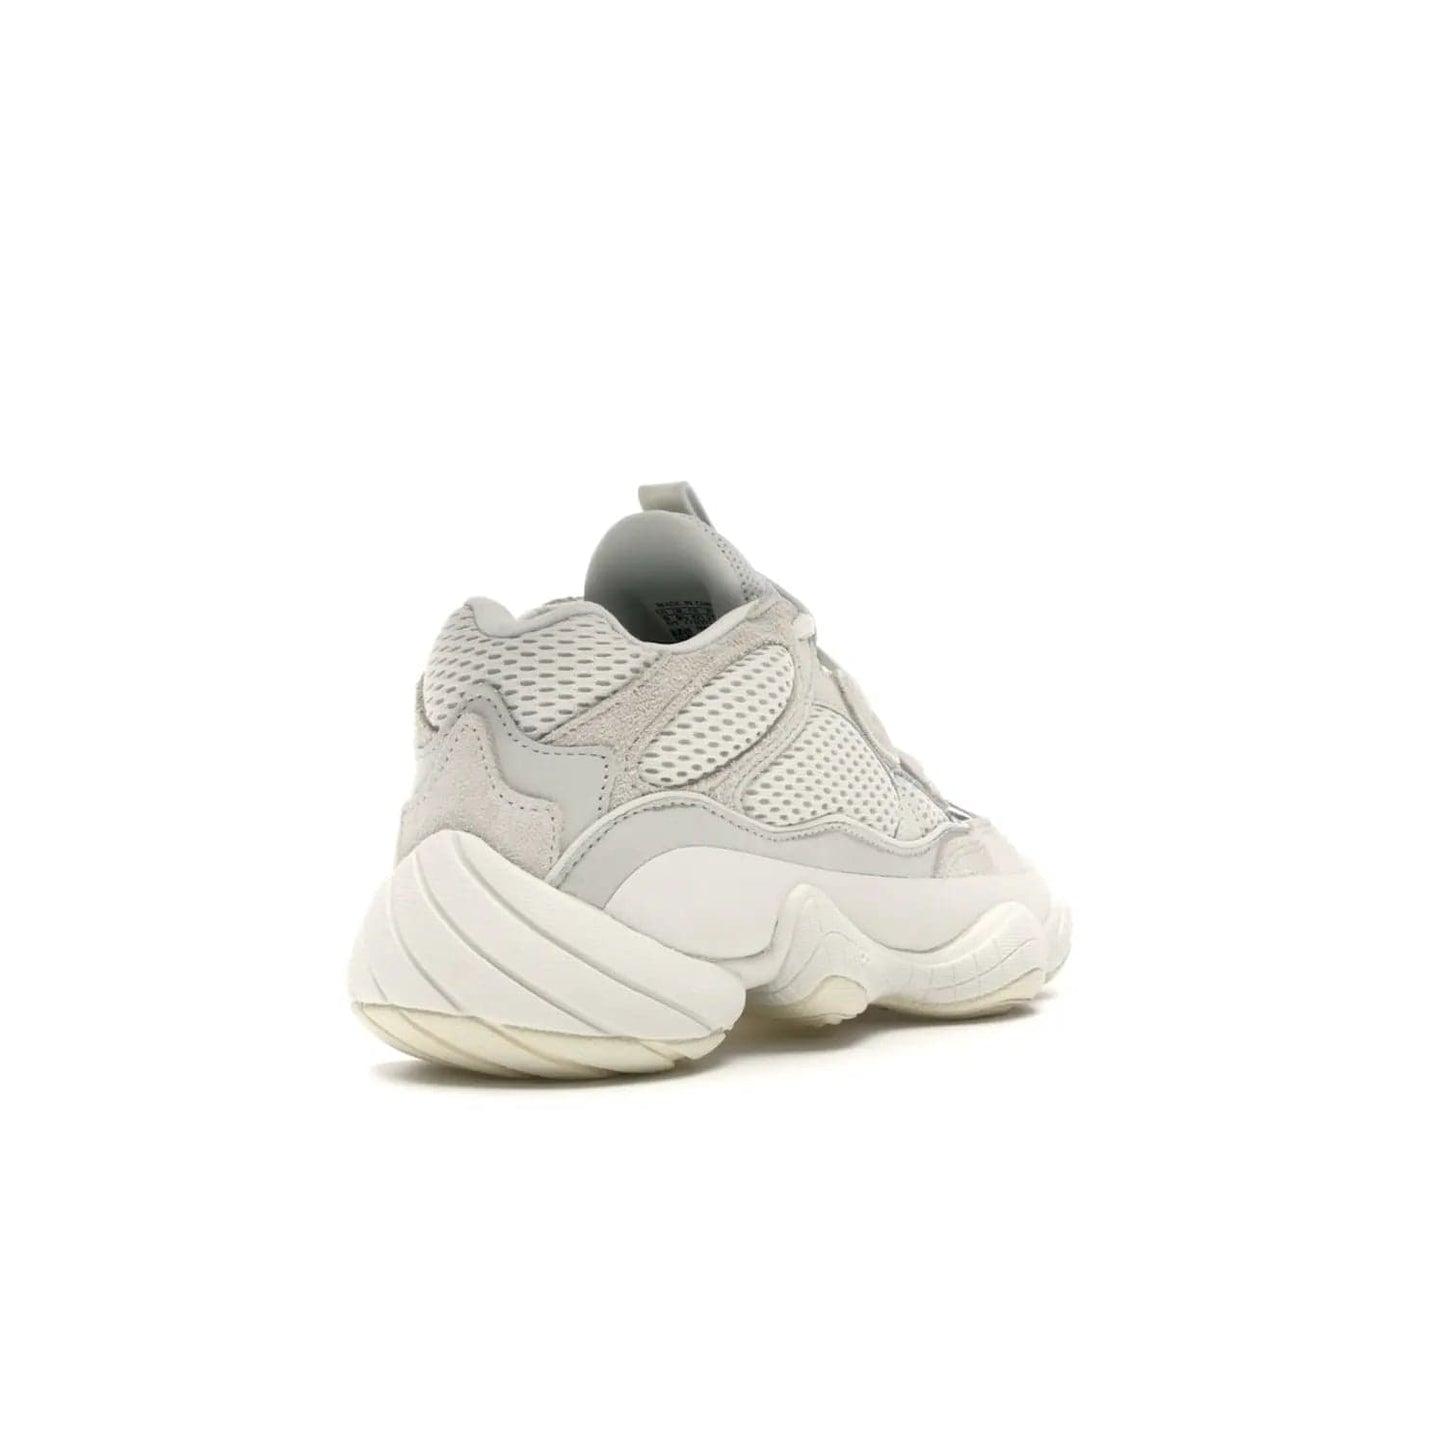 adidas Yeezy 500 Bone White - Image 31 - Only at www.BallersClubKickz.com - Classic look perfect for any sneaker collection. The adidas Yeezy 500 "Bone White" blends a white mesh upper with suede overlays & a chunky midsole inspired by the Adidas KB3. Complimented by a tonal-cream outsole, this timeless style is a must-have.